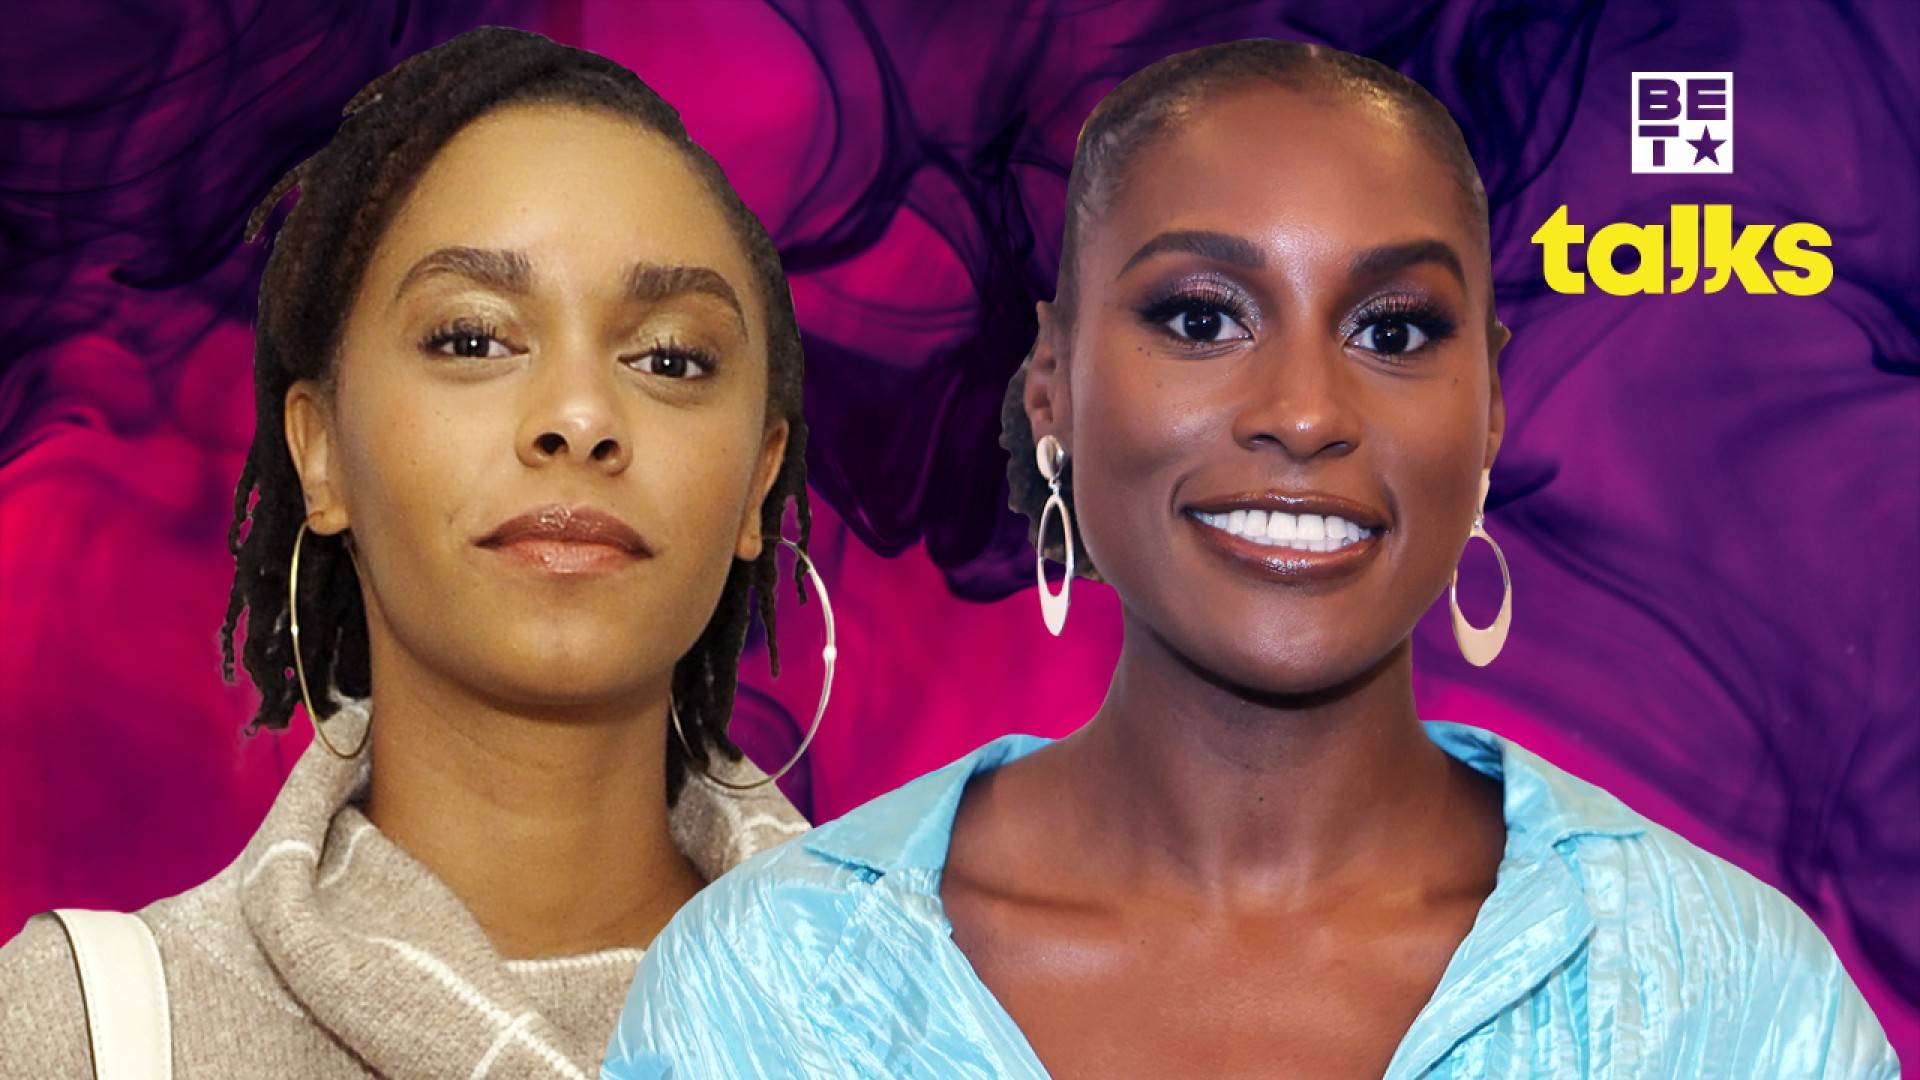 HBO Max Drops Official Trailer for New Issa Rae Series 'Rap Sh!t